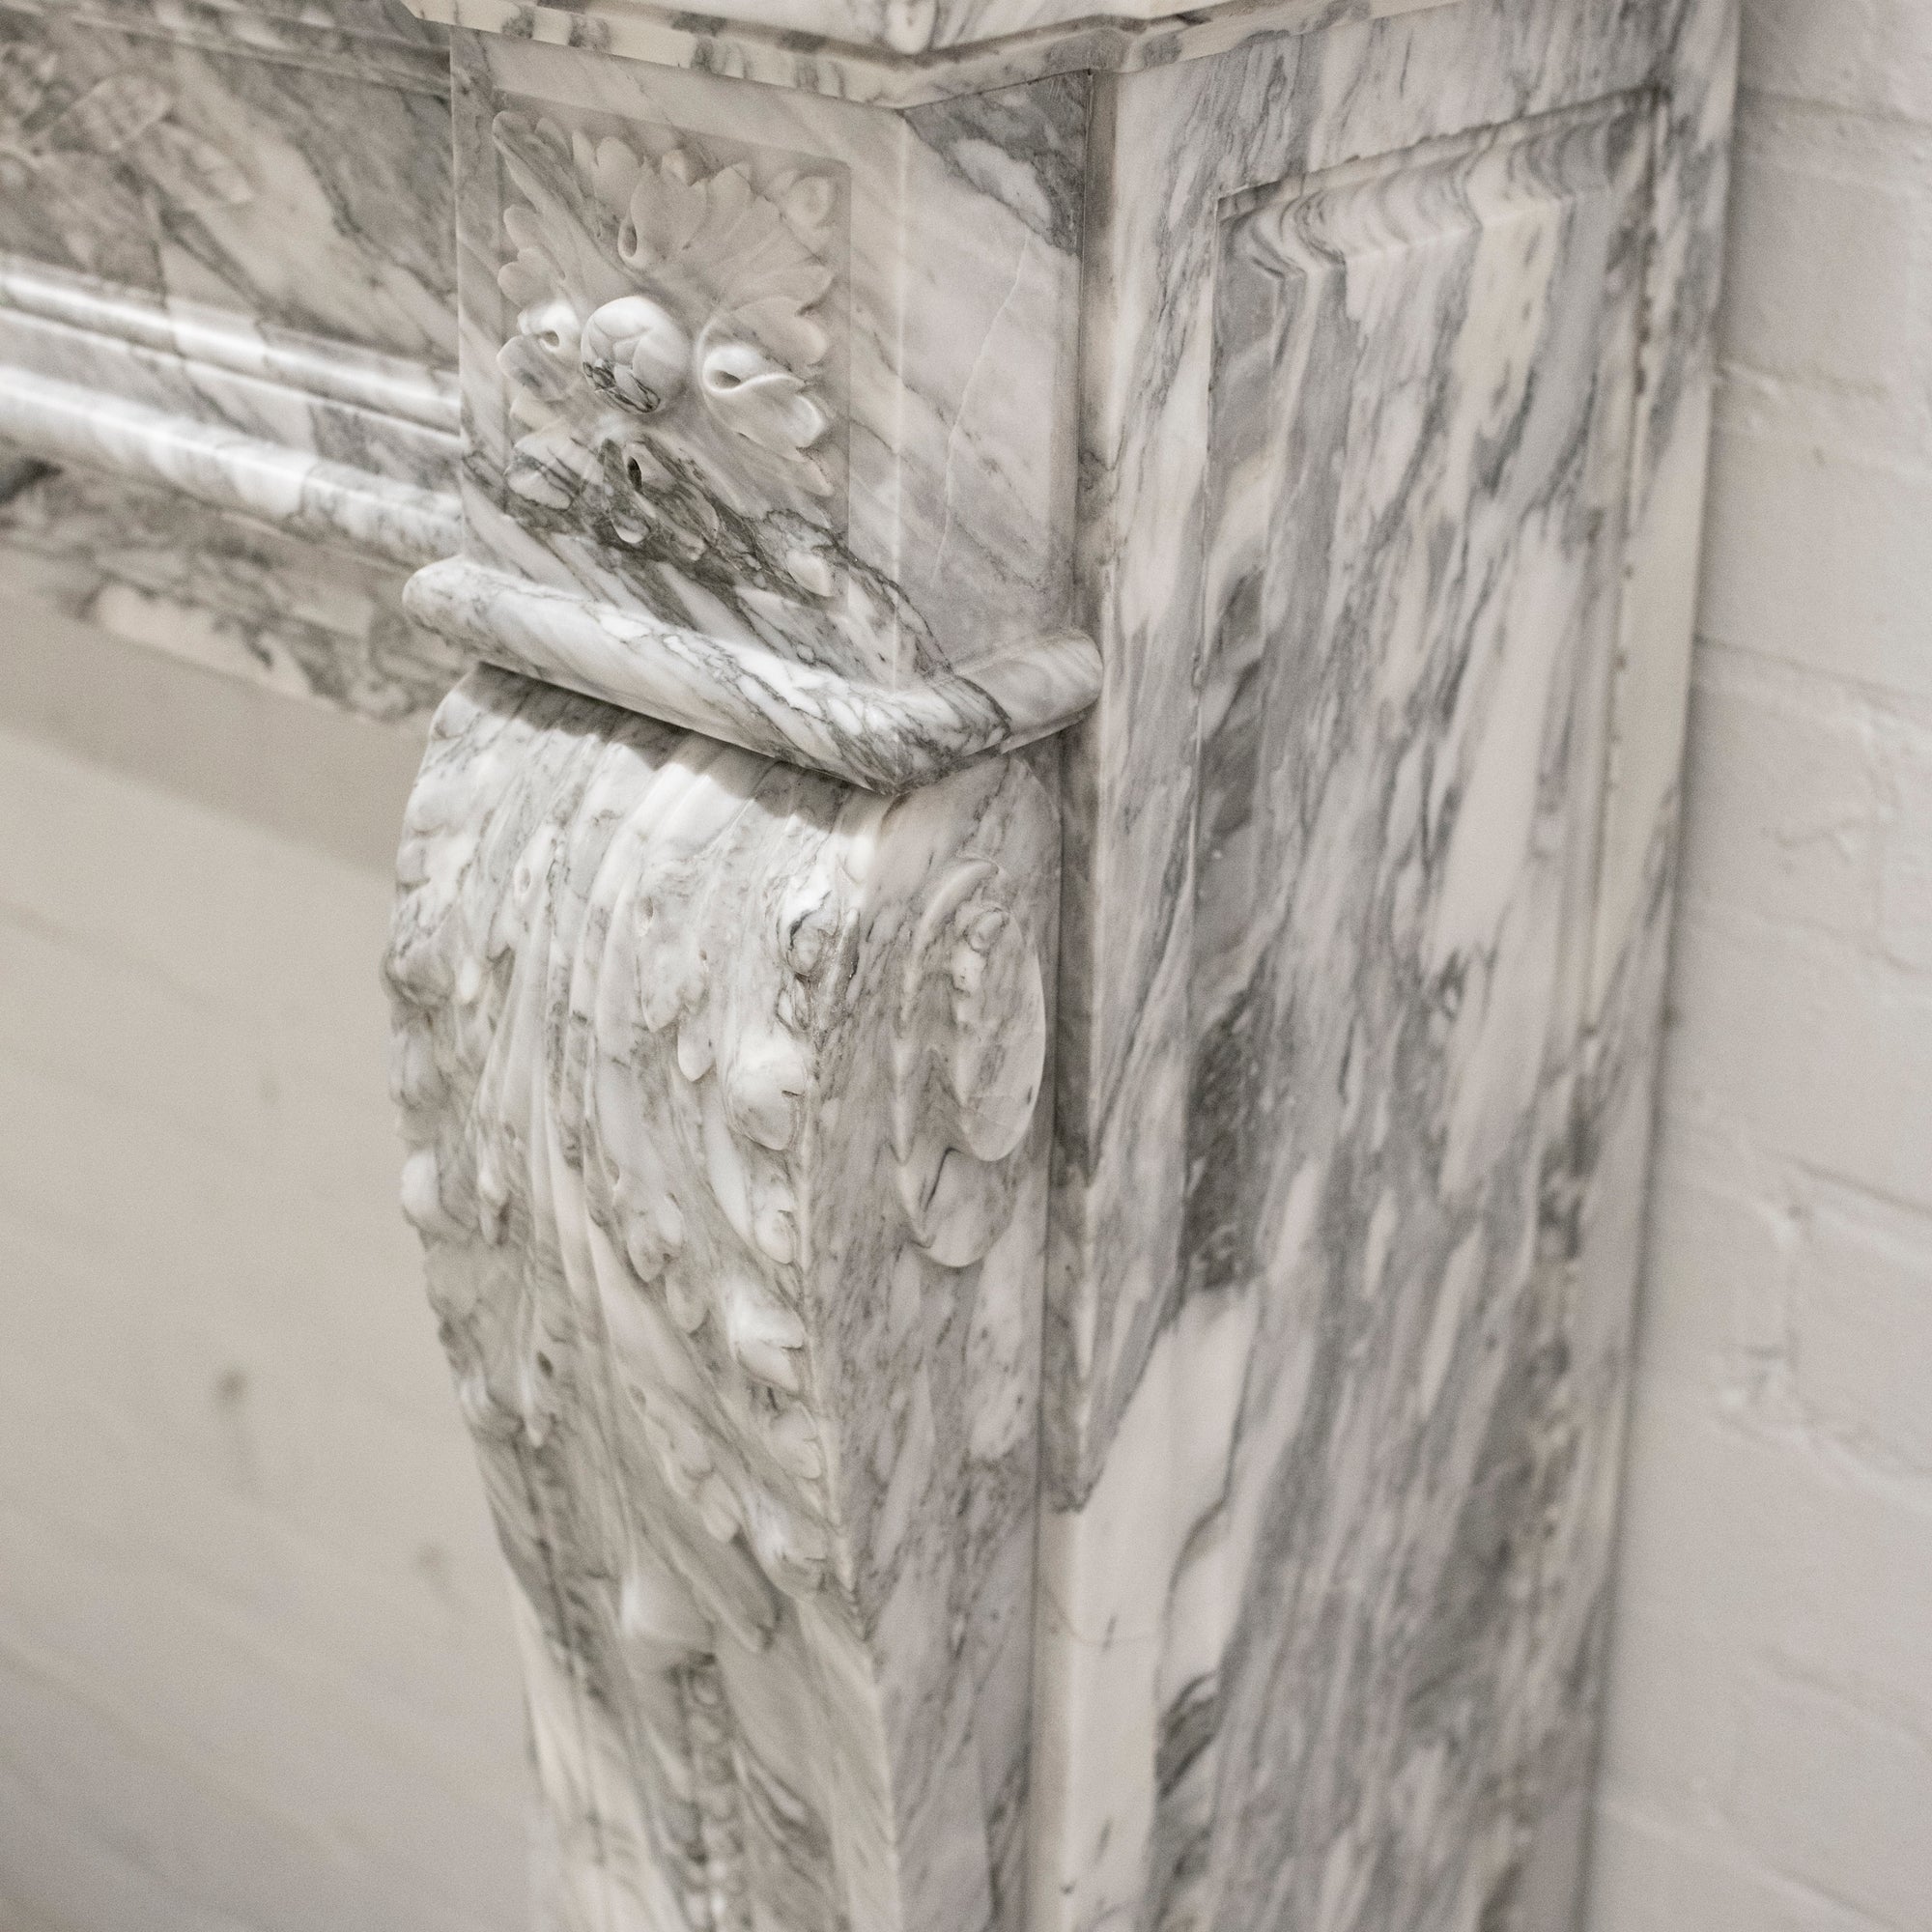 Louis XVI Style Italian Marble Fireplace in Arabescato Marble | The Architectural Forum